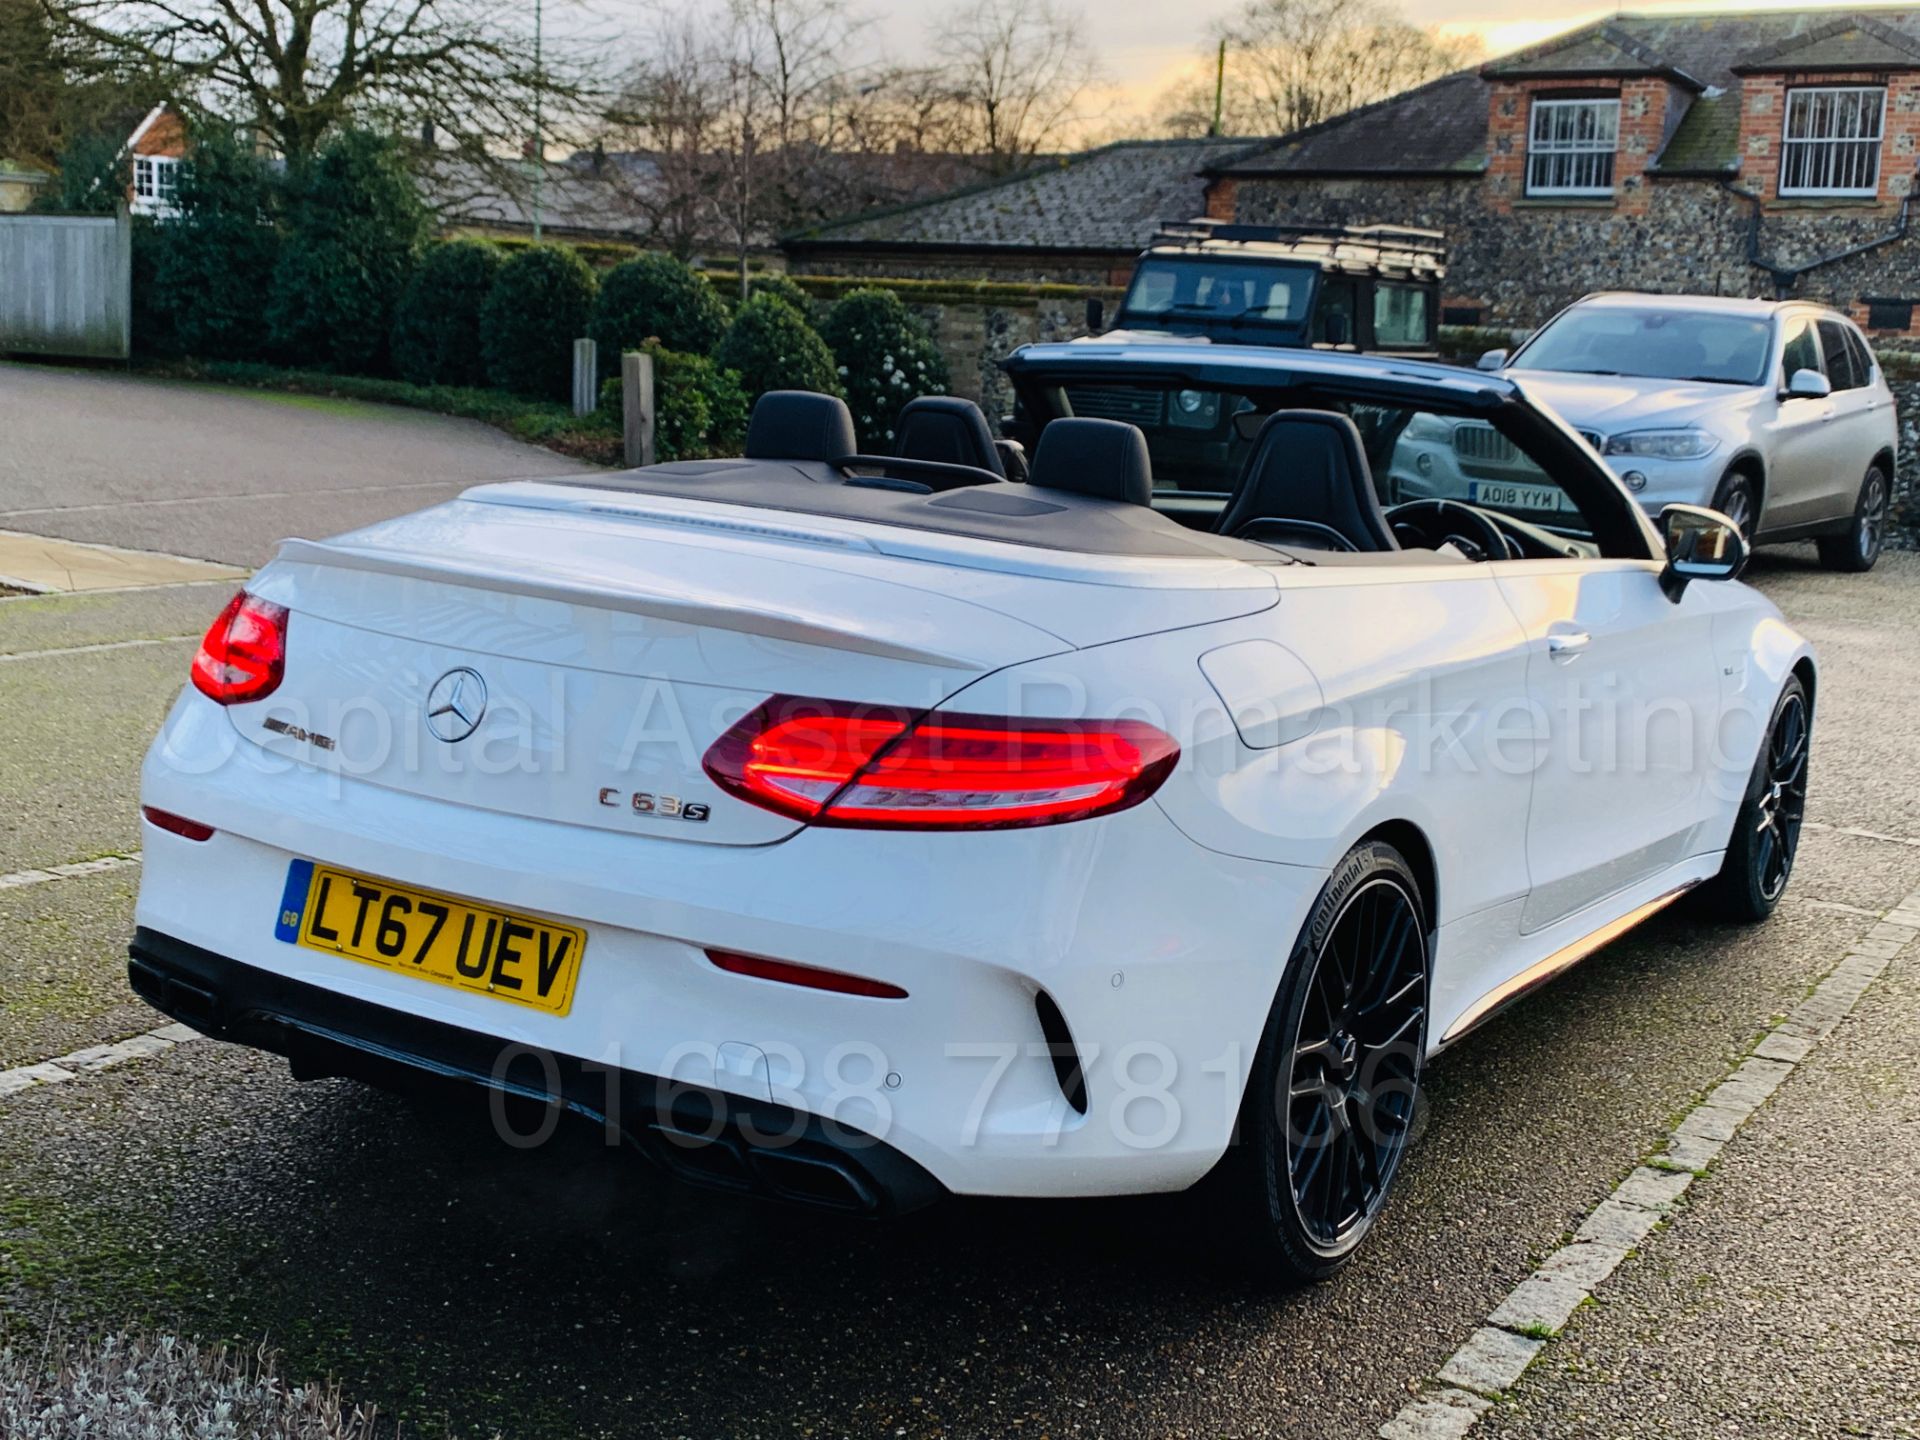 (On Sale) MERCEDES-BENZ AMG C63-S *CABRIOLET* (67 REG) '4.0 BI-TURBO -510 BHP - AUTO' *FULLY LOADED* - Image 21 of 79